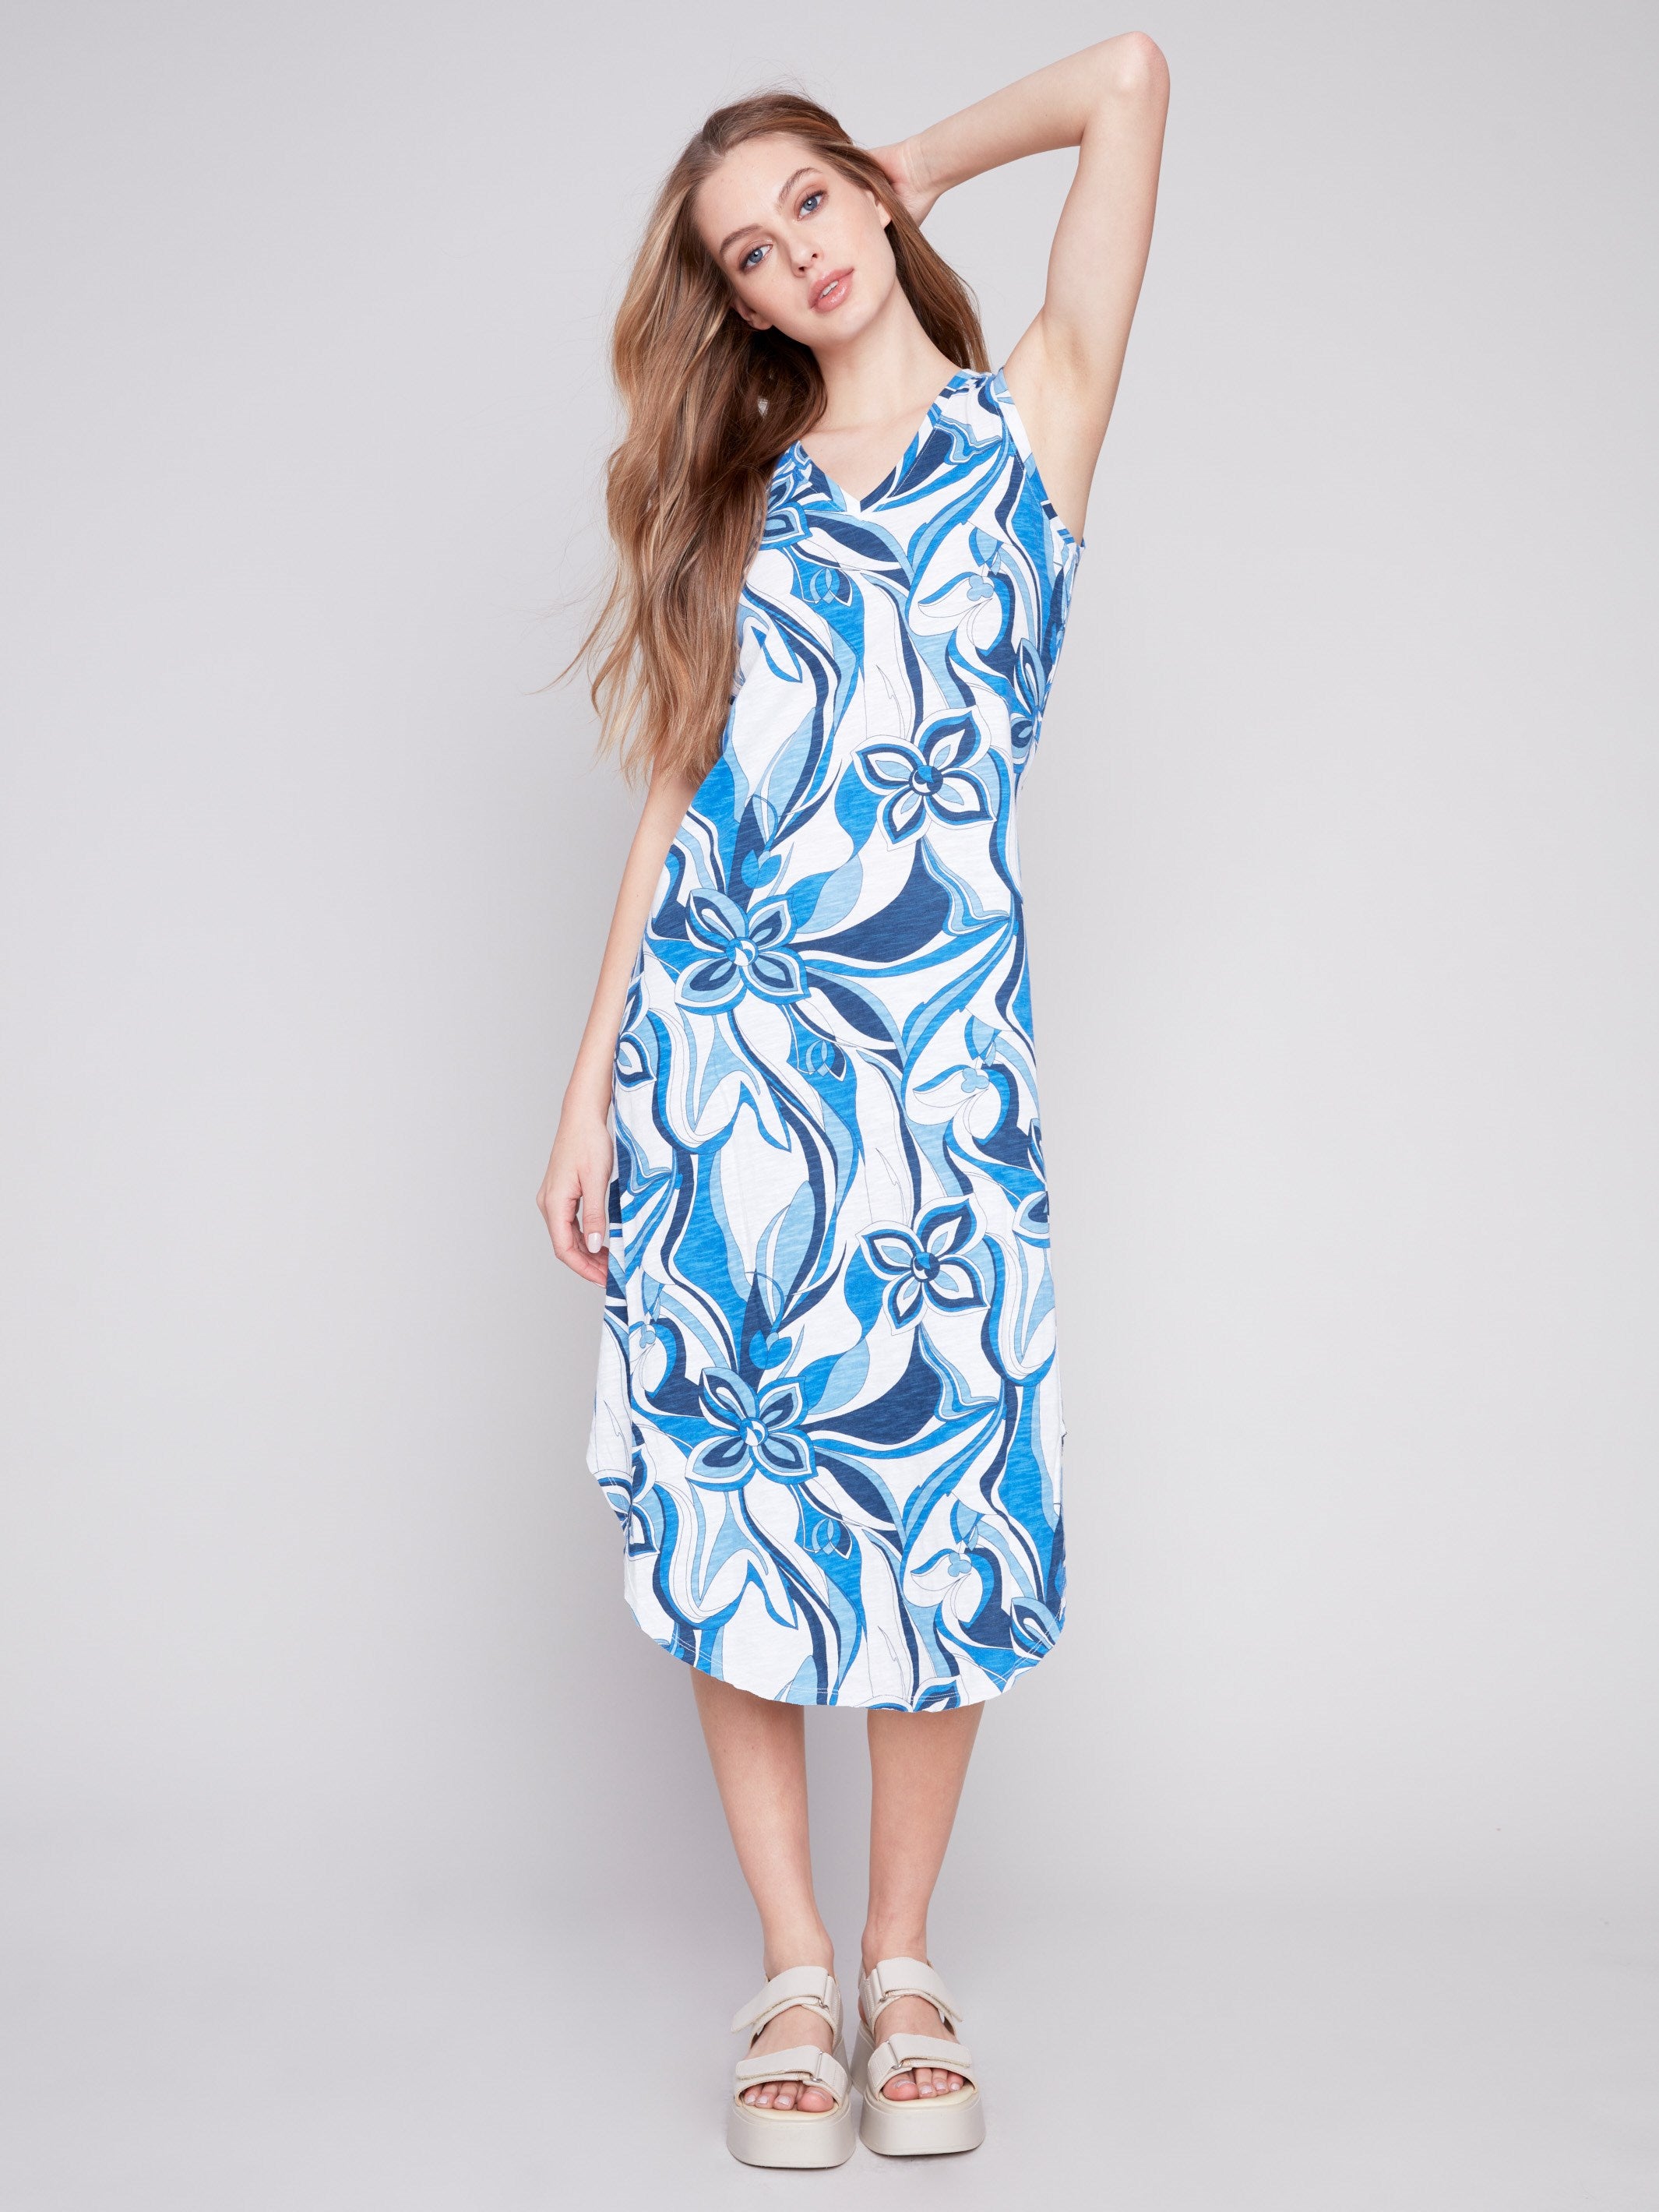 Printed Sleeveless Cotton Dress - Sky - Charlie B Collection Canada - Image 3